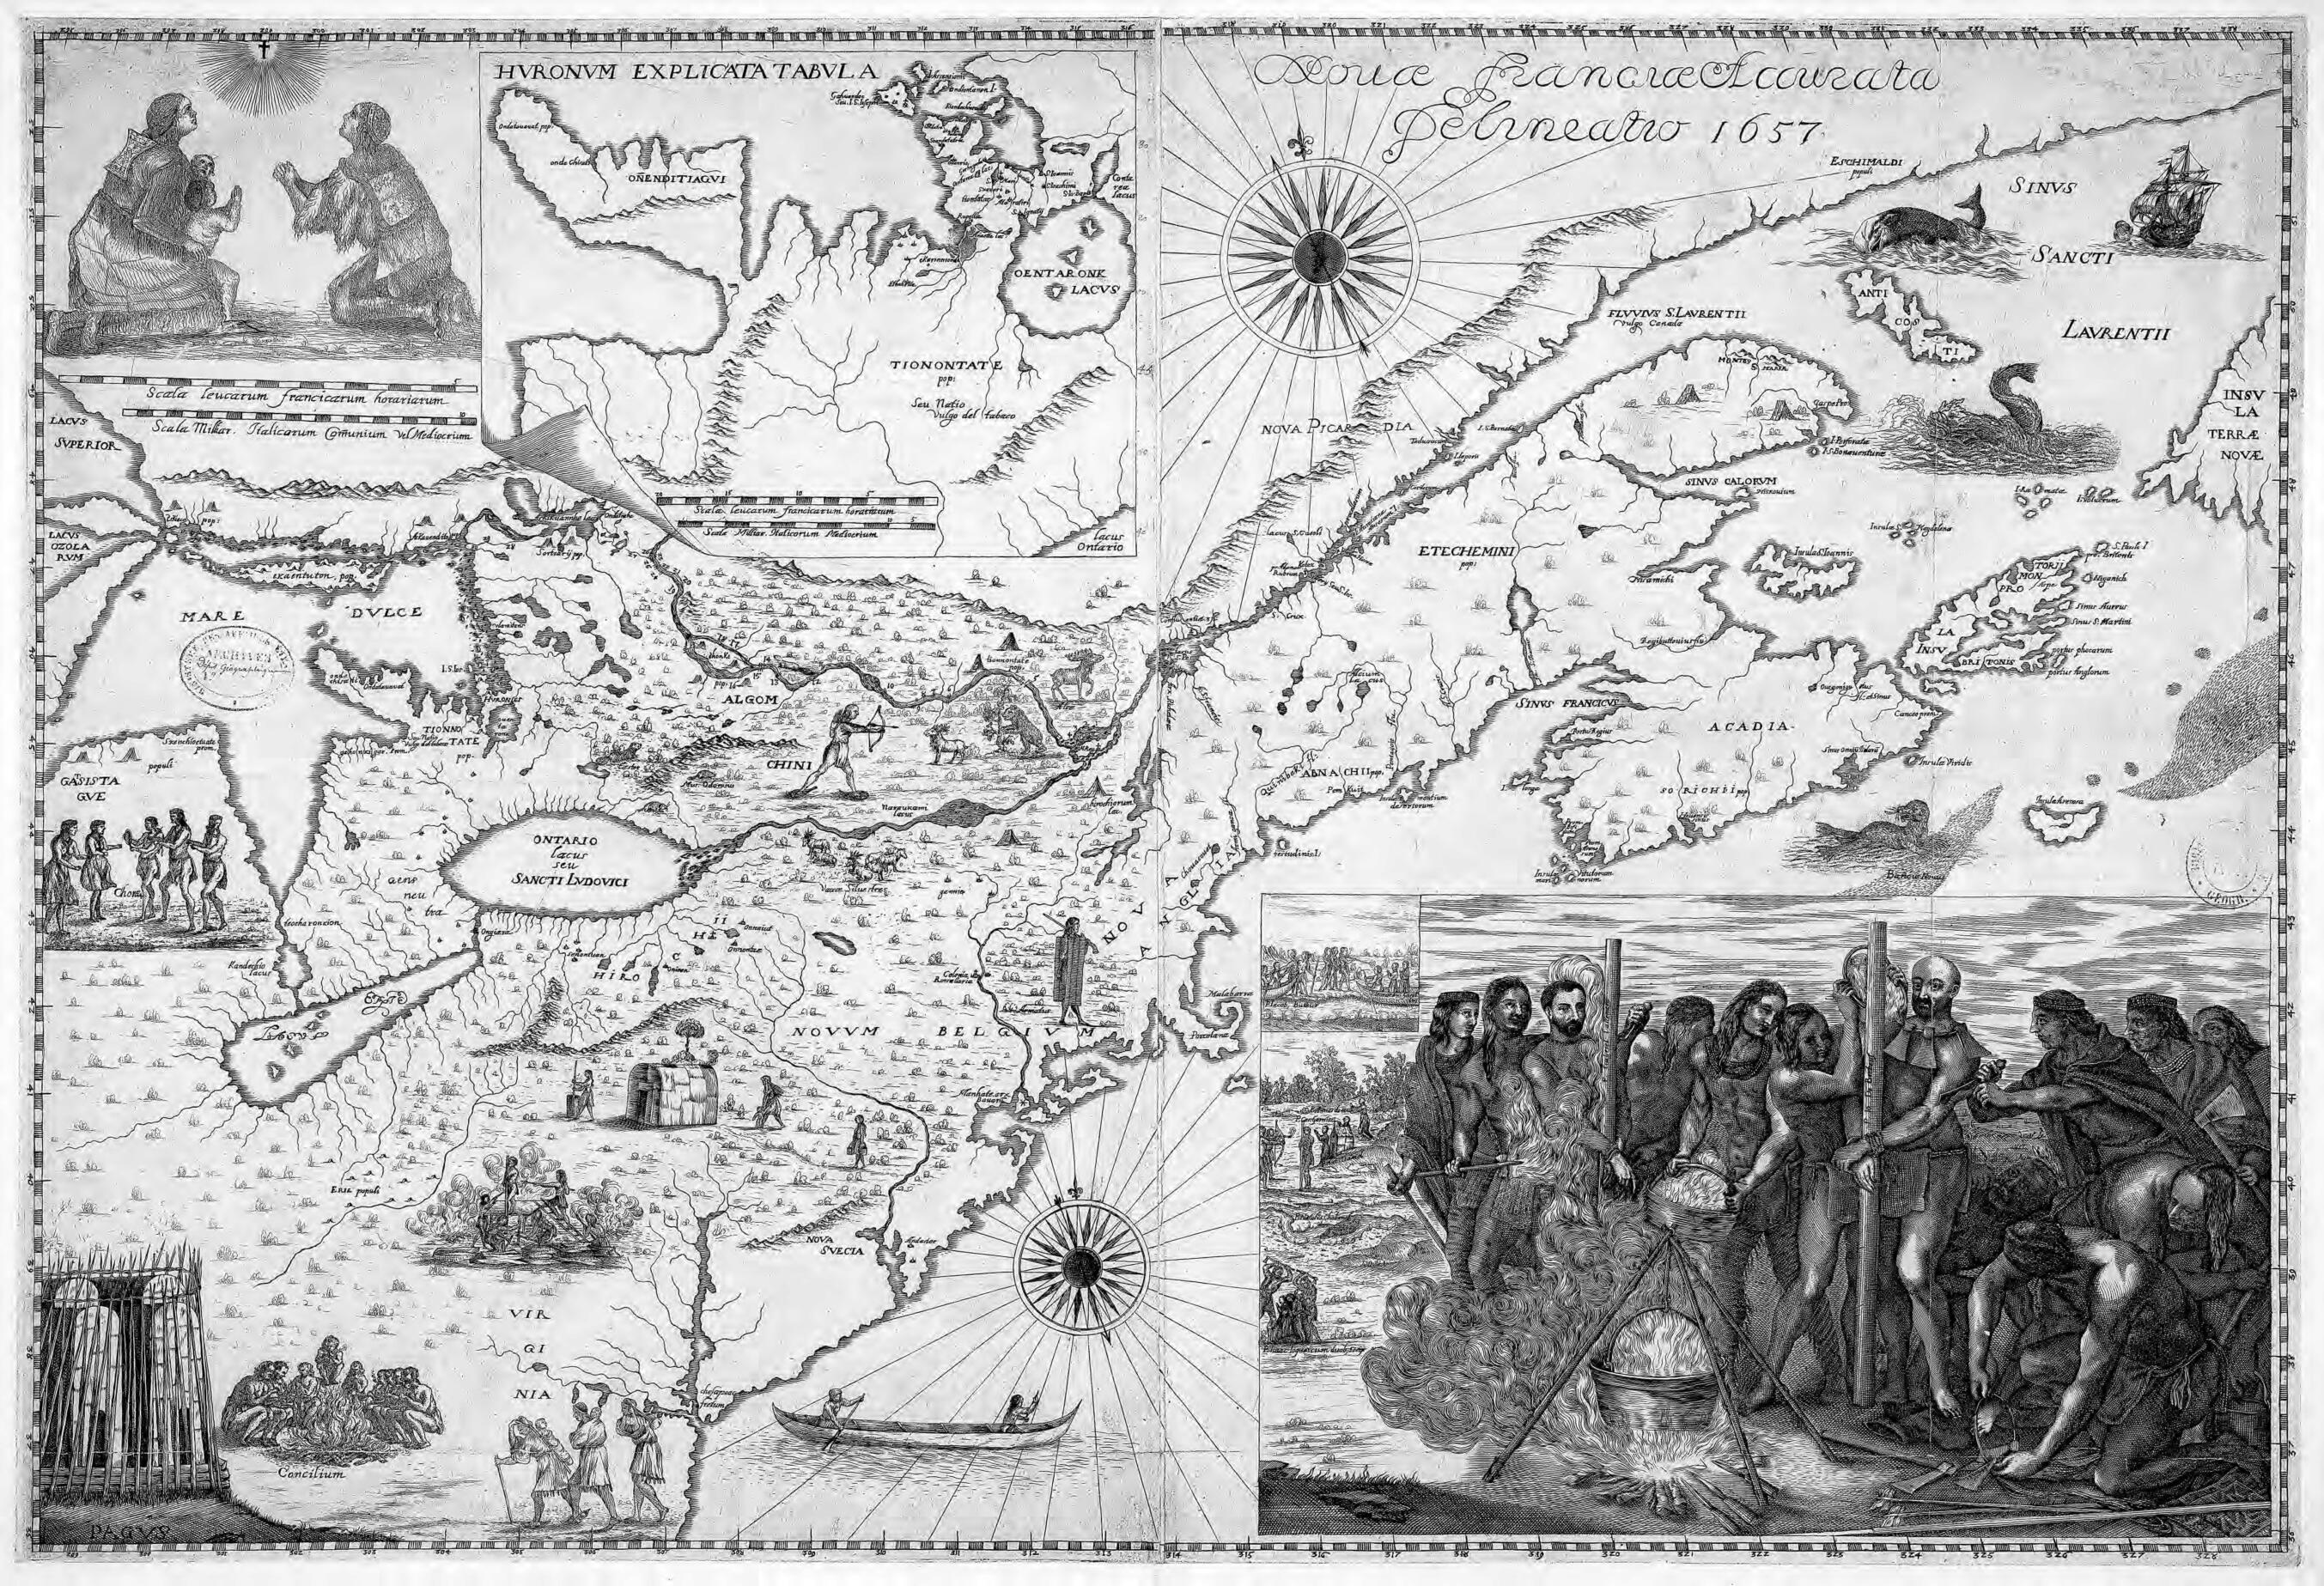 This old map of An Accurate Depiction of New France, from 1657. (Novae Franciae Accurata Delineatio, from 1657) was created by Francesco Giuseppe Bressani in 1657